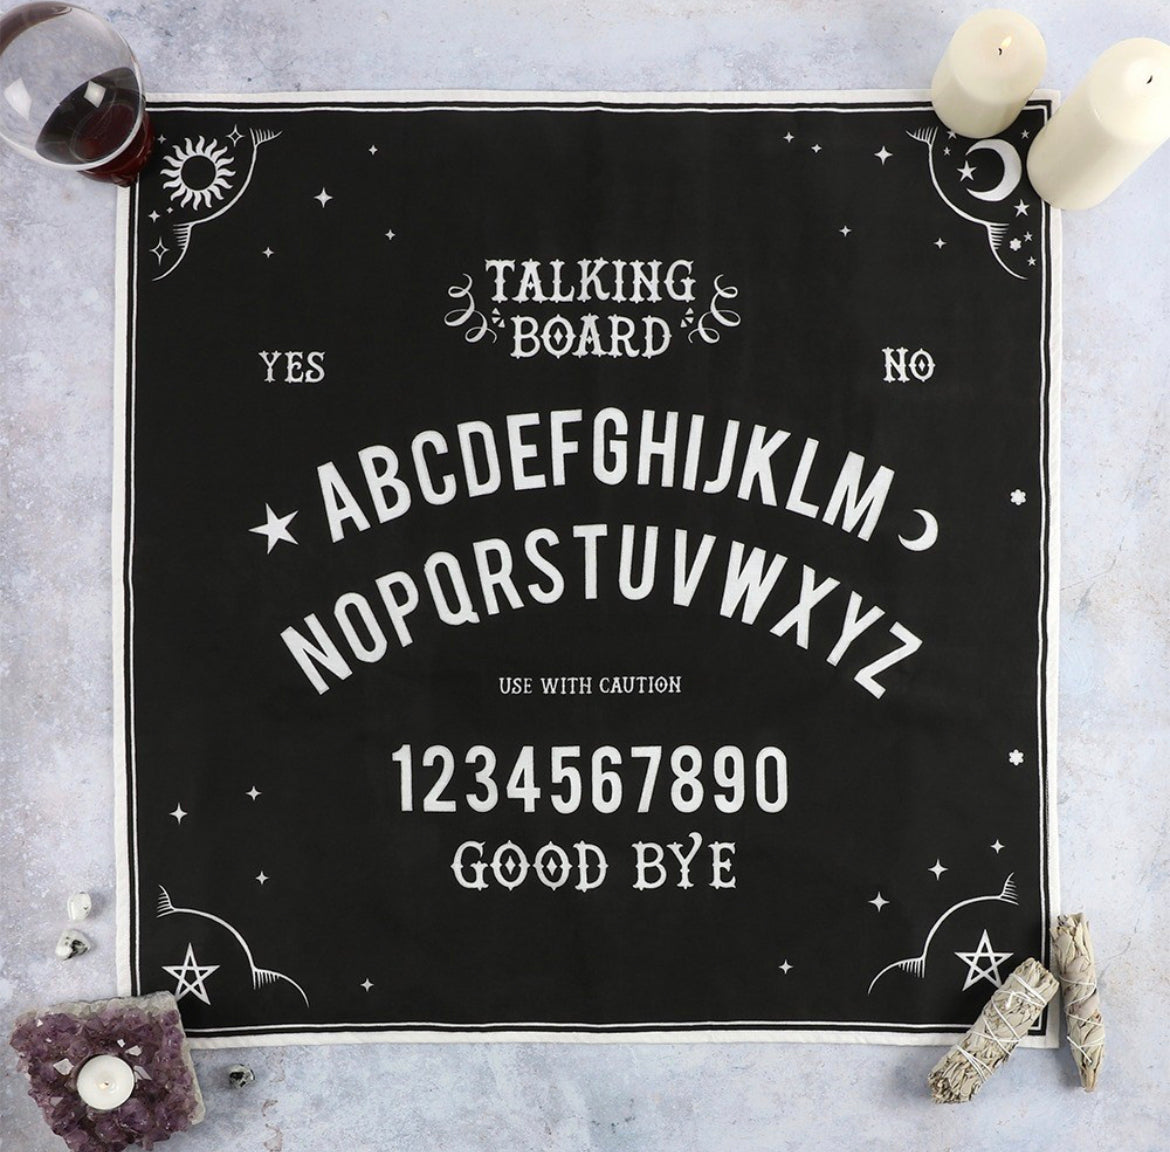 70x70cm Talking Board Altar Cloth - Wicked Witcheries